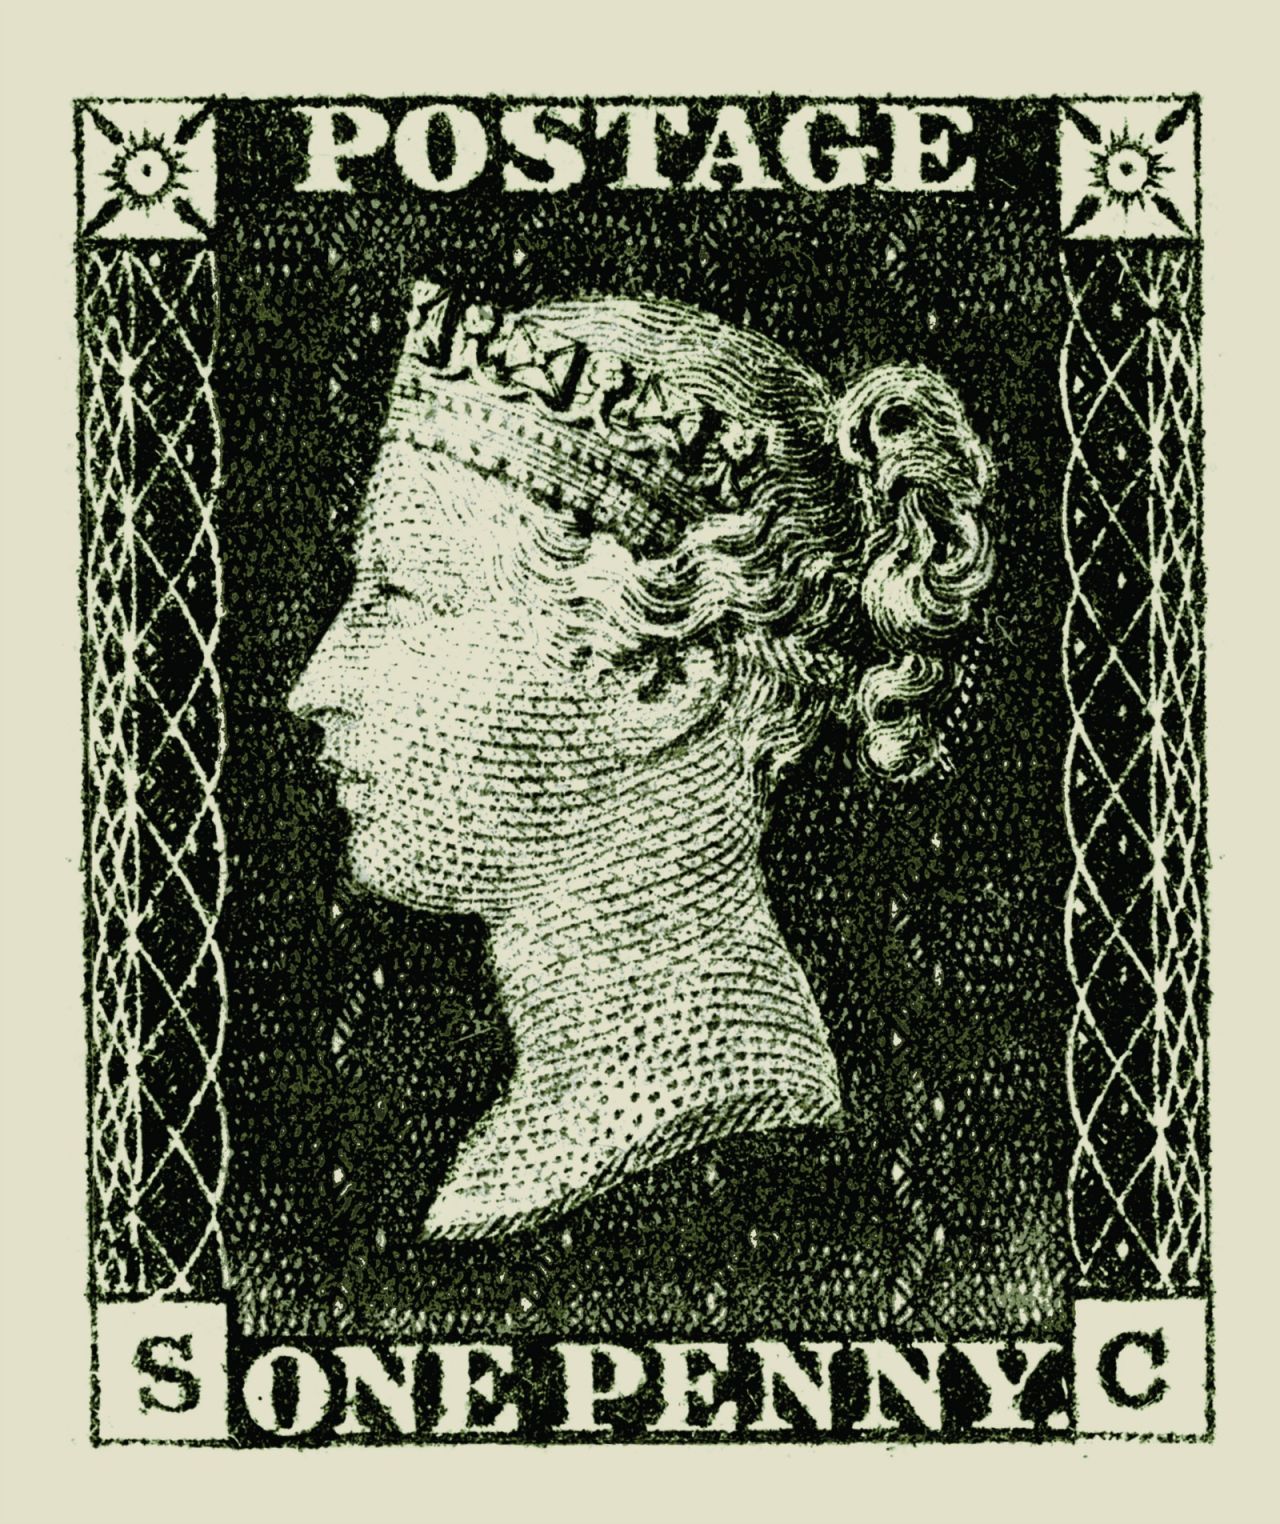 Based on Royal Mint engraver William Wyon's portrait of Queen Victoria on the so-called City Medal, the Royal Mail's 1840 Penny Black was the world's first adhesive postage stamp. A small stamp with pitch-black ink etchings, its radical design became the model for making stamps around the world.